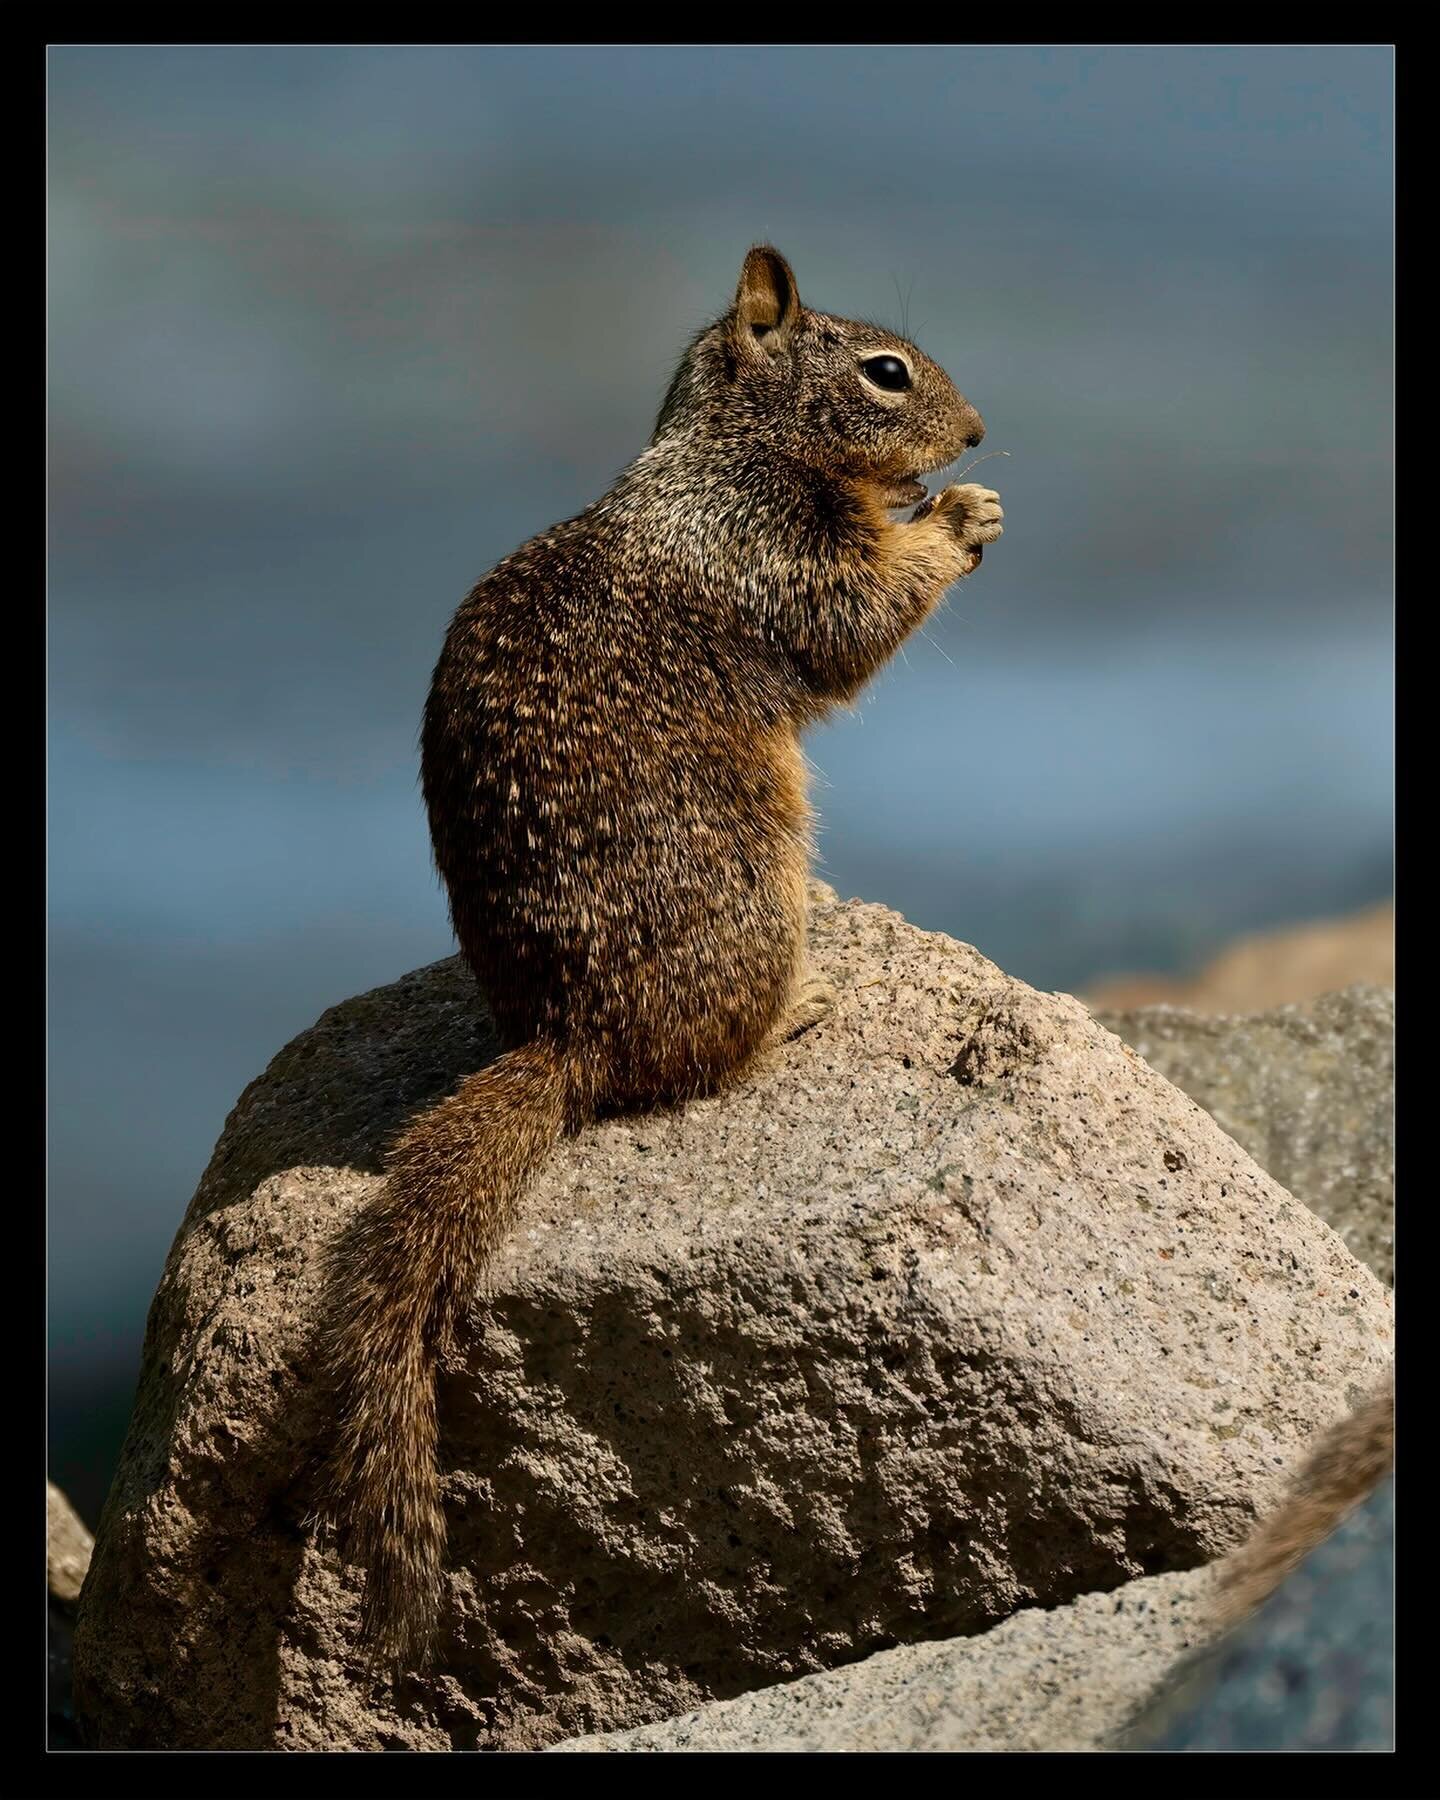 A squirrel hoping for someone to drop some sustenance at Morro Rock! #morrobay 

Nikon Z7II
Nikkor 80-400mm f/4.5-5.6

#squirrel #squirrellove #squirrellife #squirrels #morrobayca #morrorock #animals_captures #squirrelwhisperer #squirrelhunting #squi